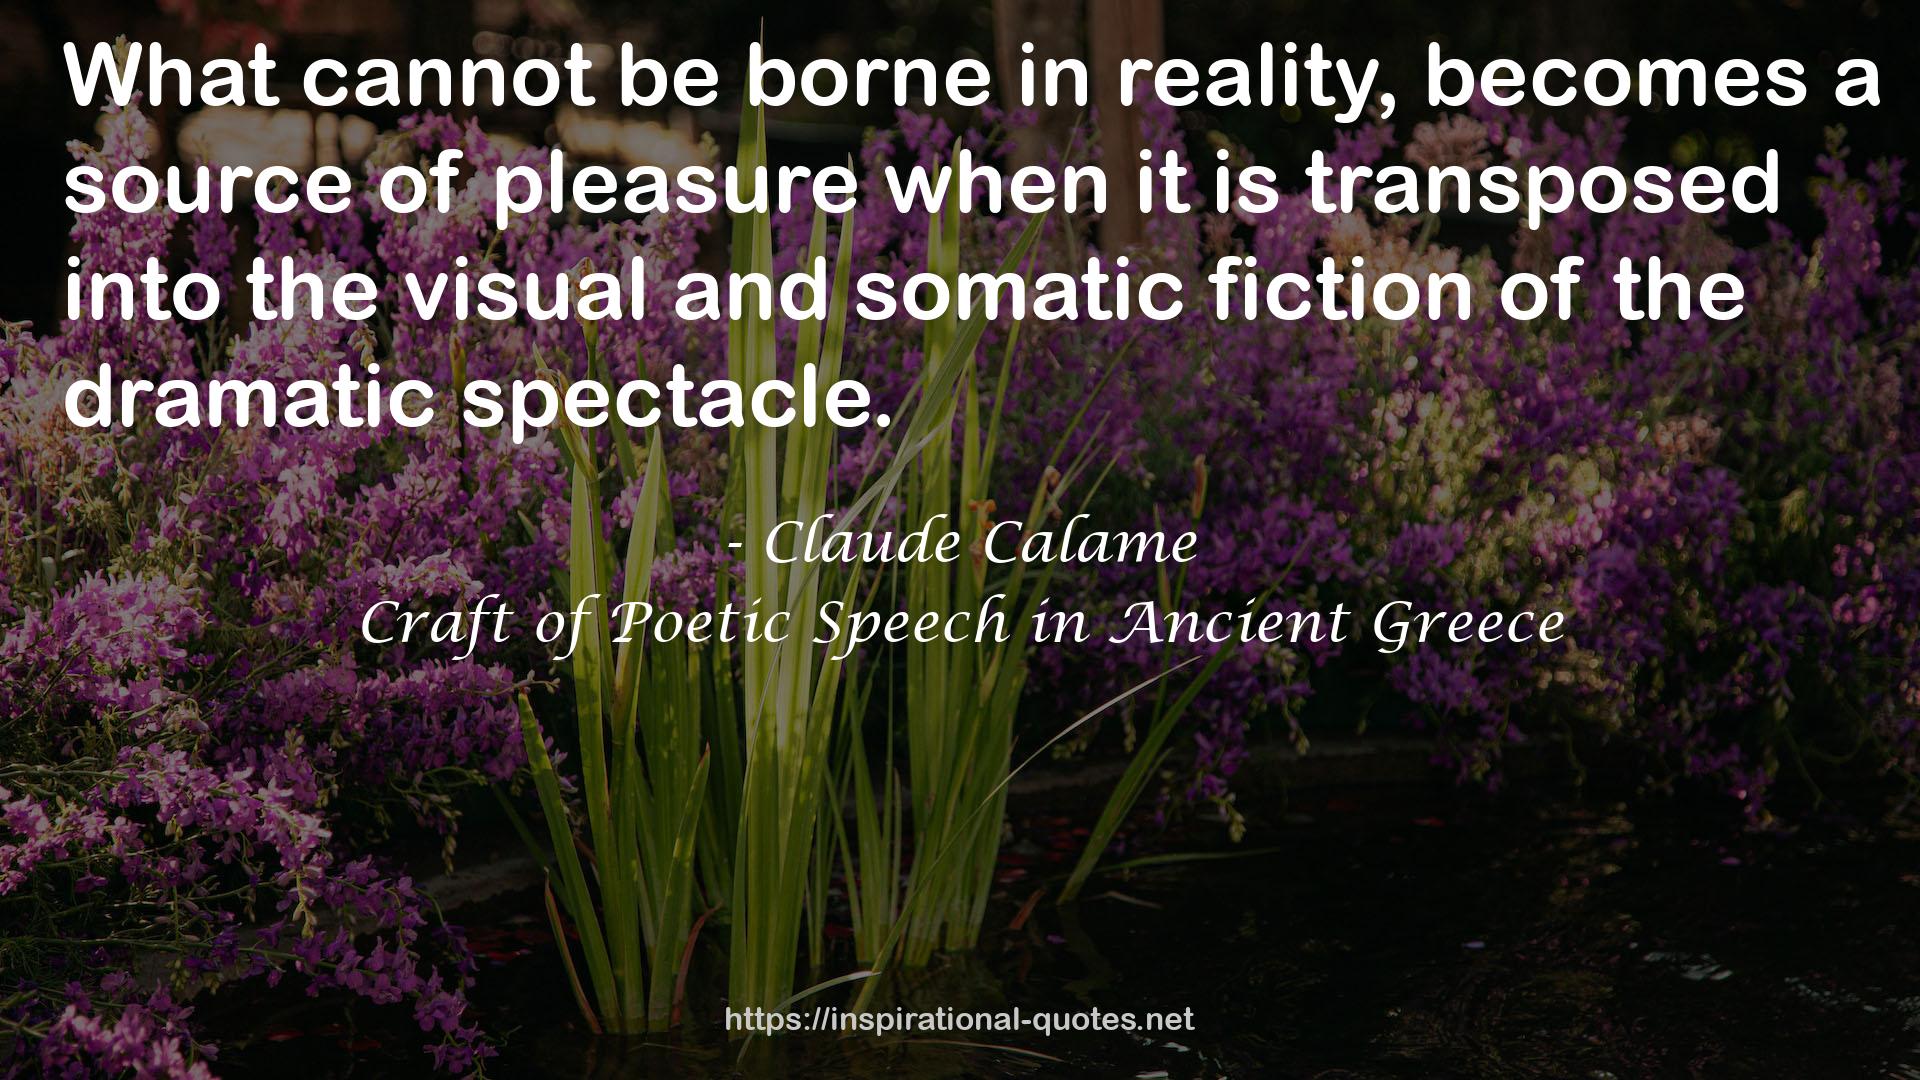 Craft of Poetic Speech in Ancient Greece QUOTES